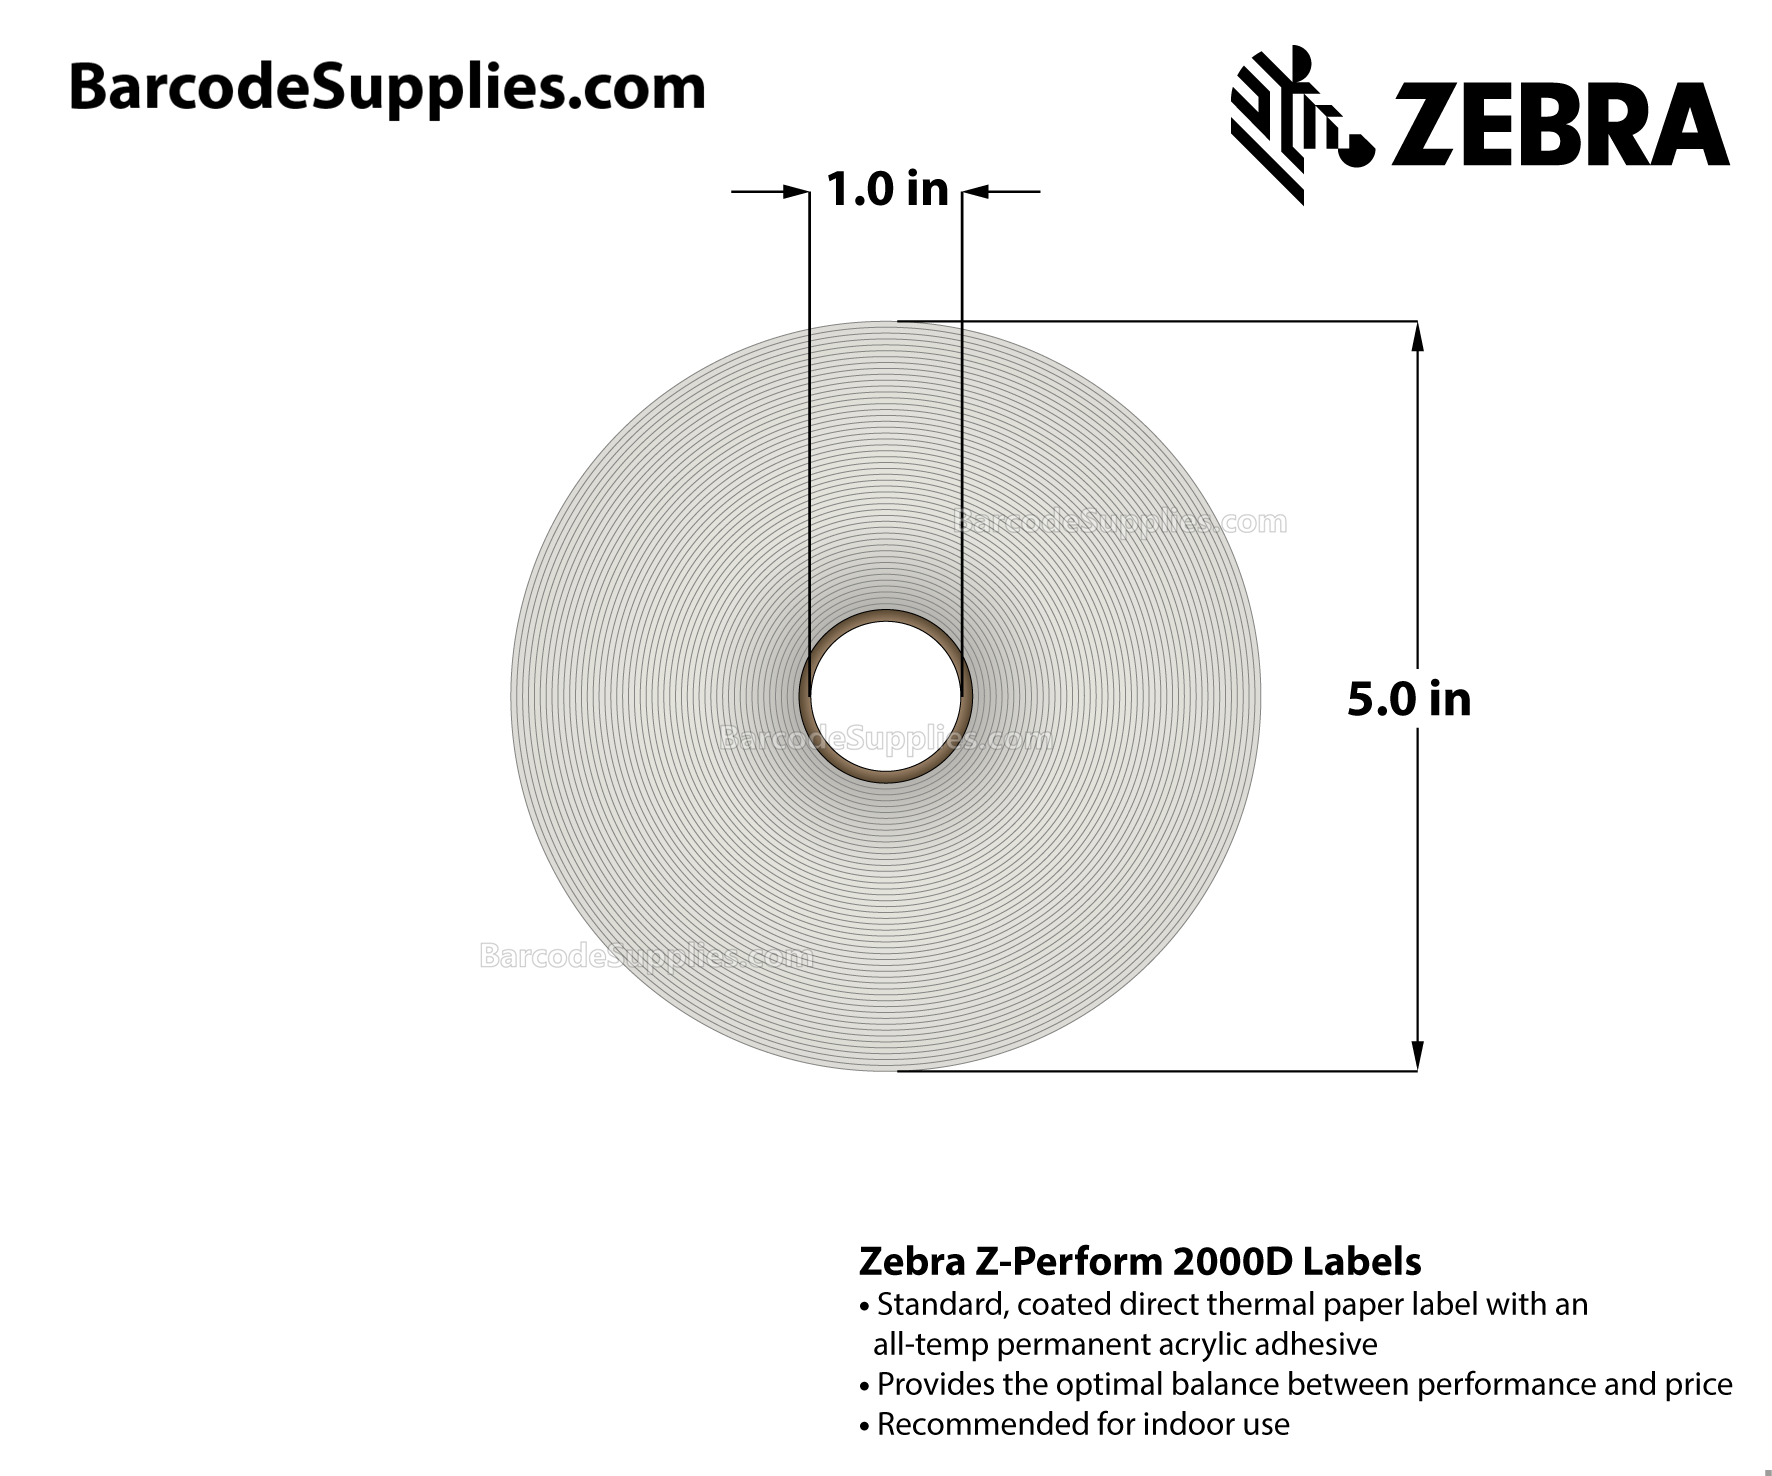 3 x 2 Direct Thermal White Z-Perform 2000D Labels With All-Temp Adhesive - Perforated - 1240 Labels Per Roll - Carton Of 6 Rolls - 7440 Labels Total - MPN: 10010029